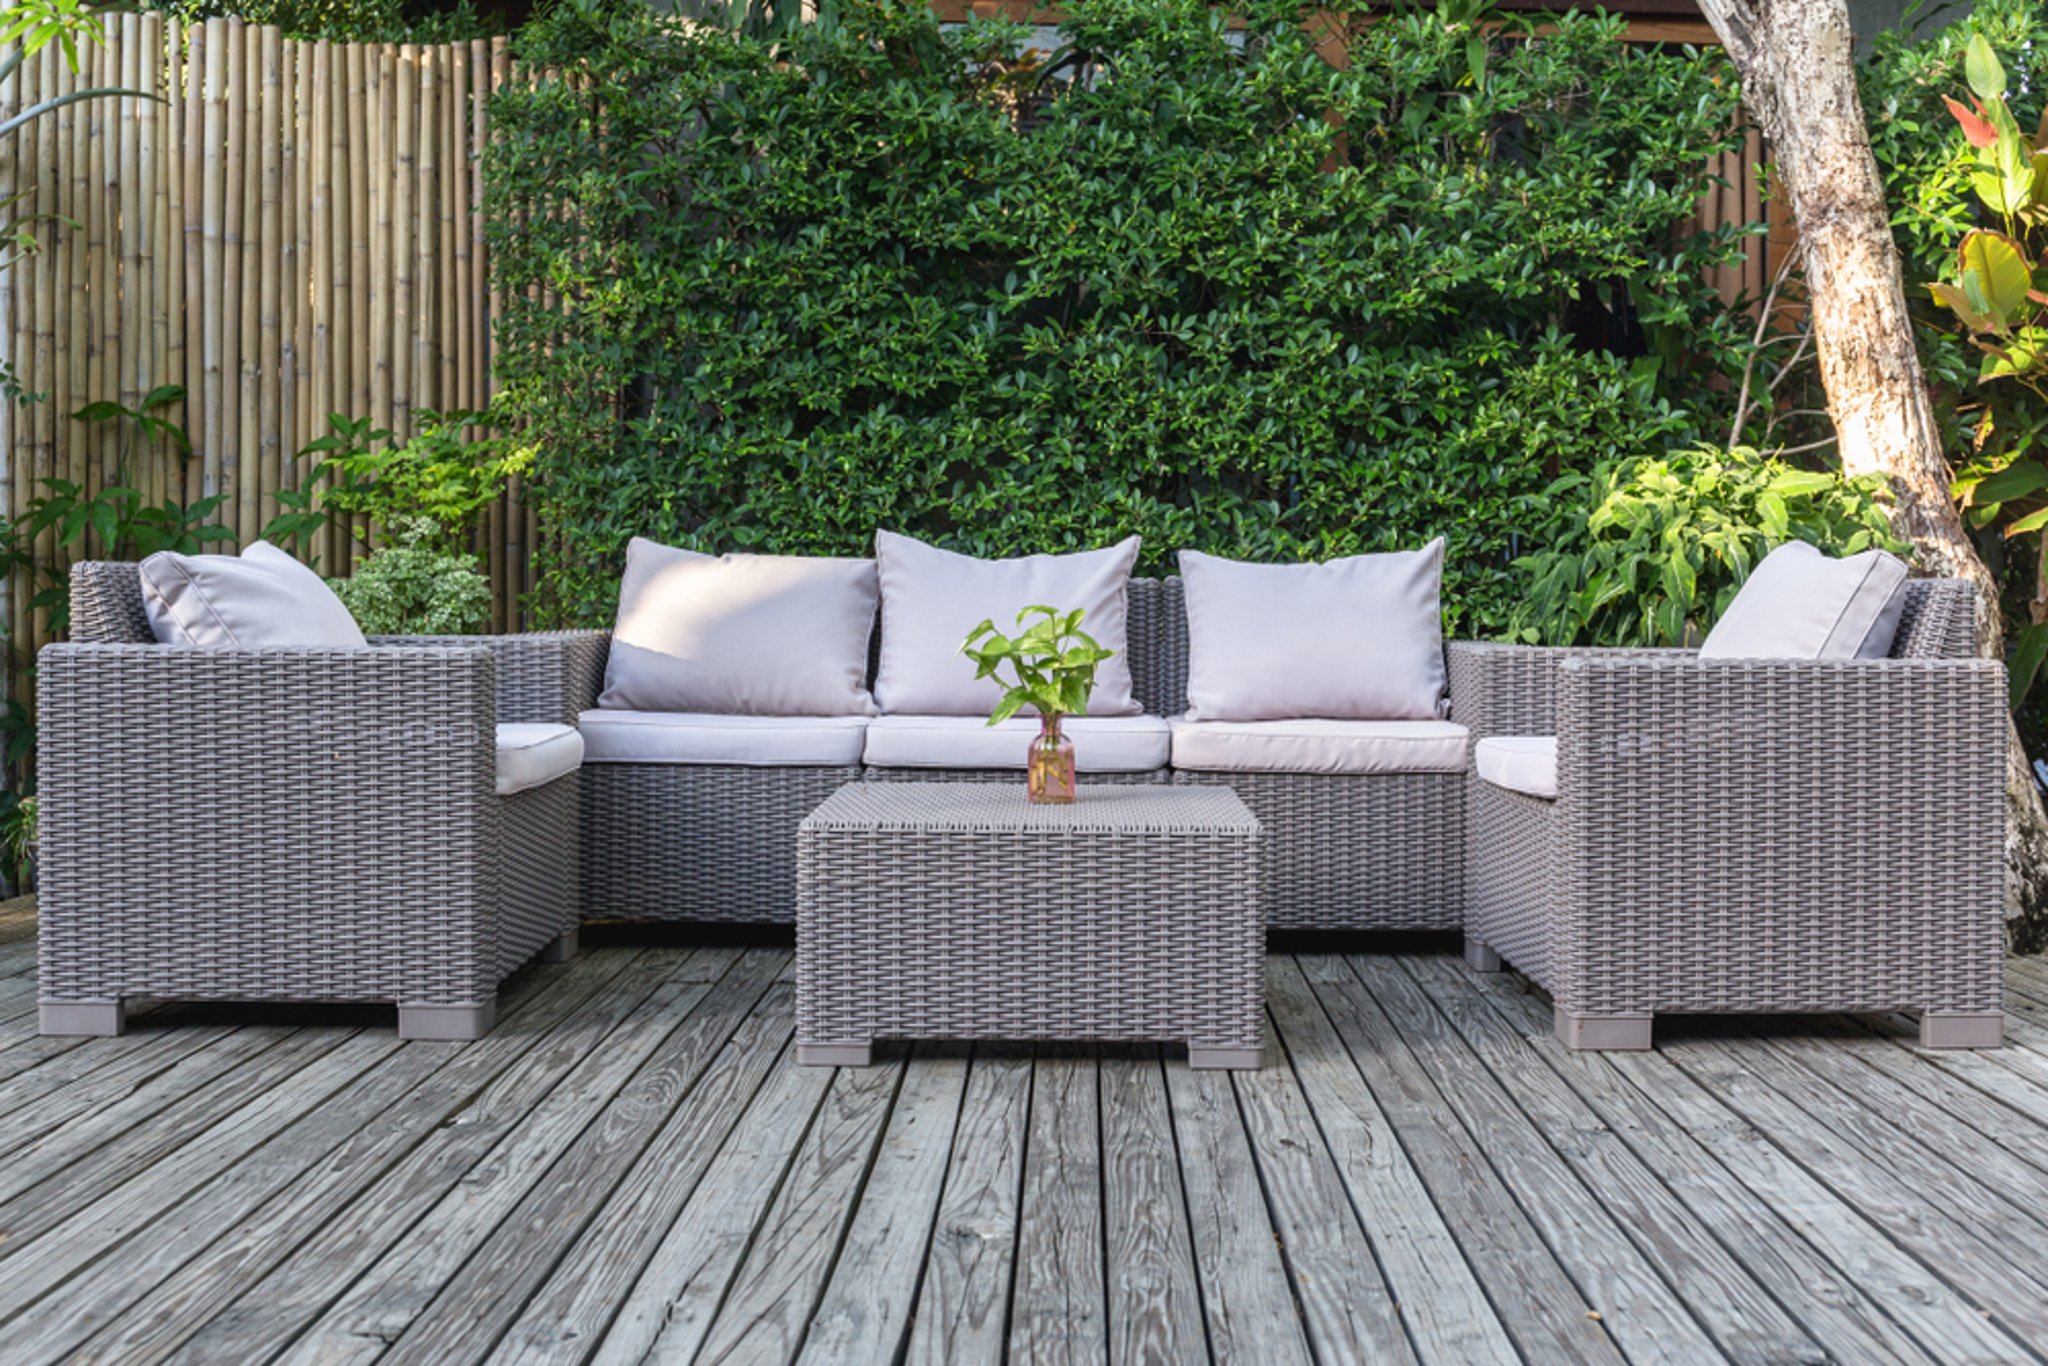 Best Rattan Garden Furniture 2021 Our, What Is The Best Rattan Garden Furniture